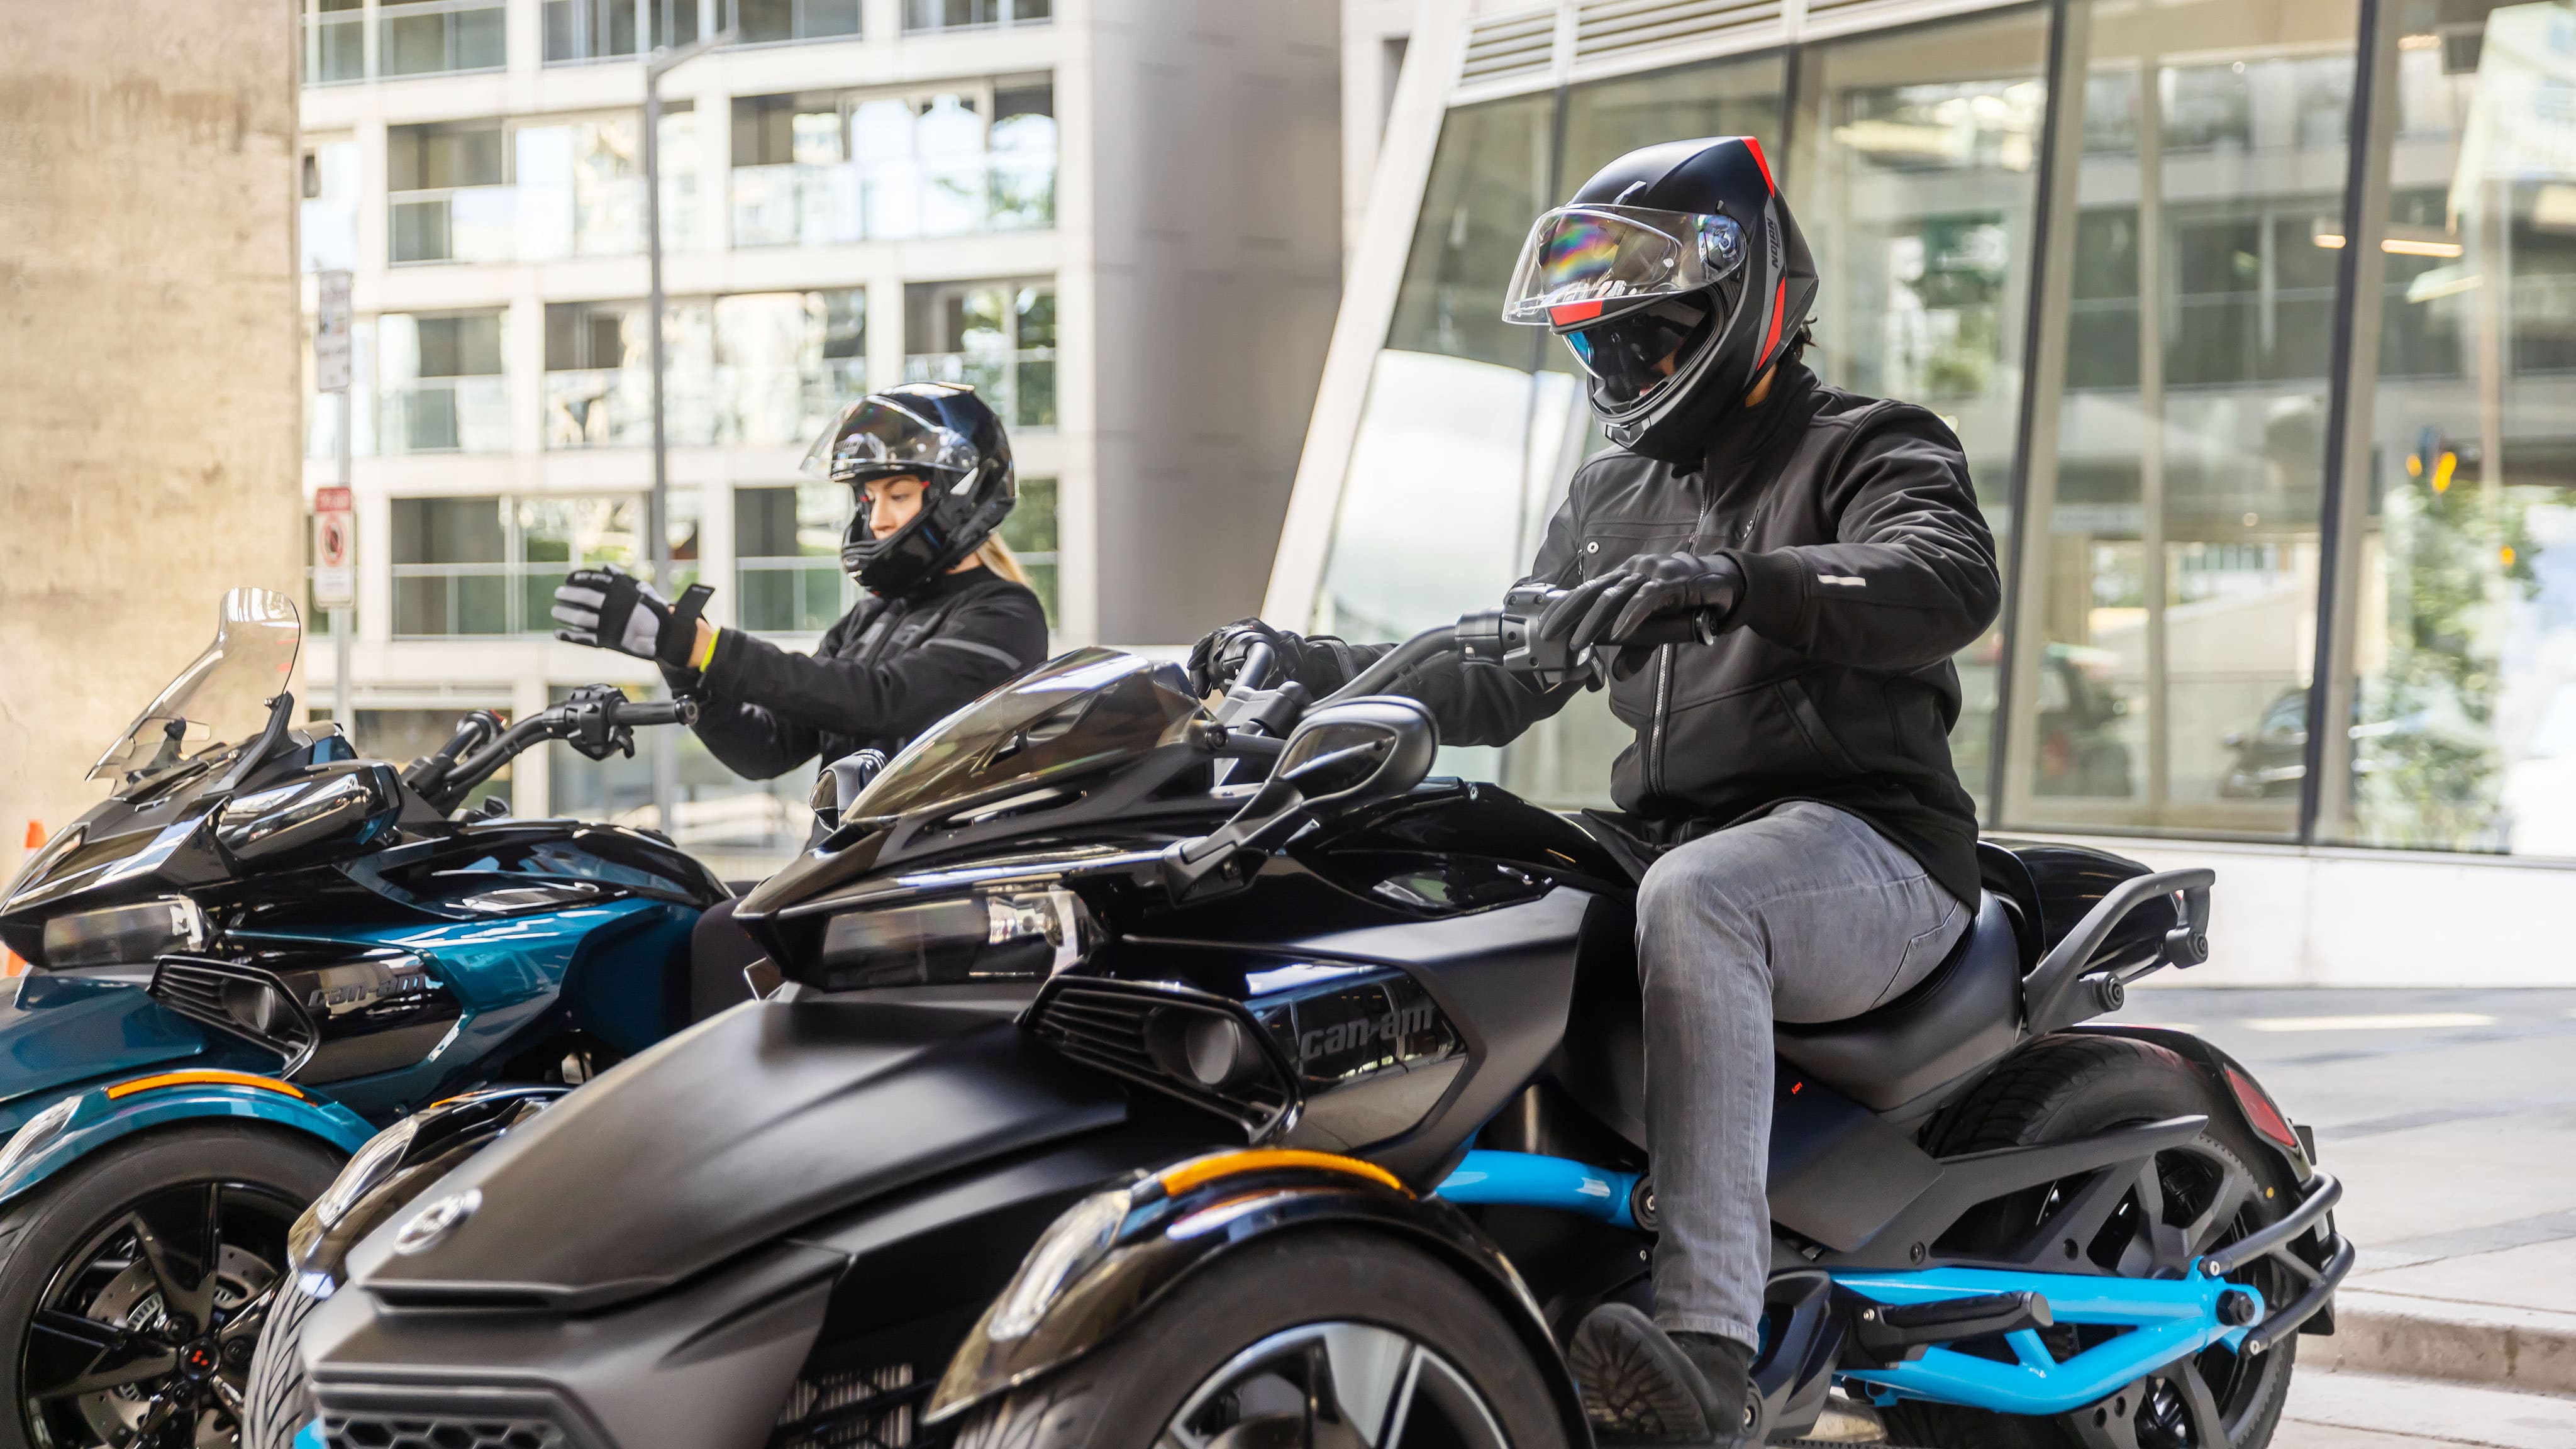 New 2023 original Riding Gear for Can-Am Spyder and Can-Am Ryker Riders